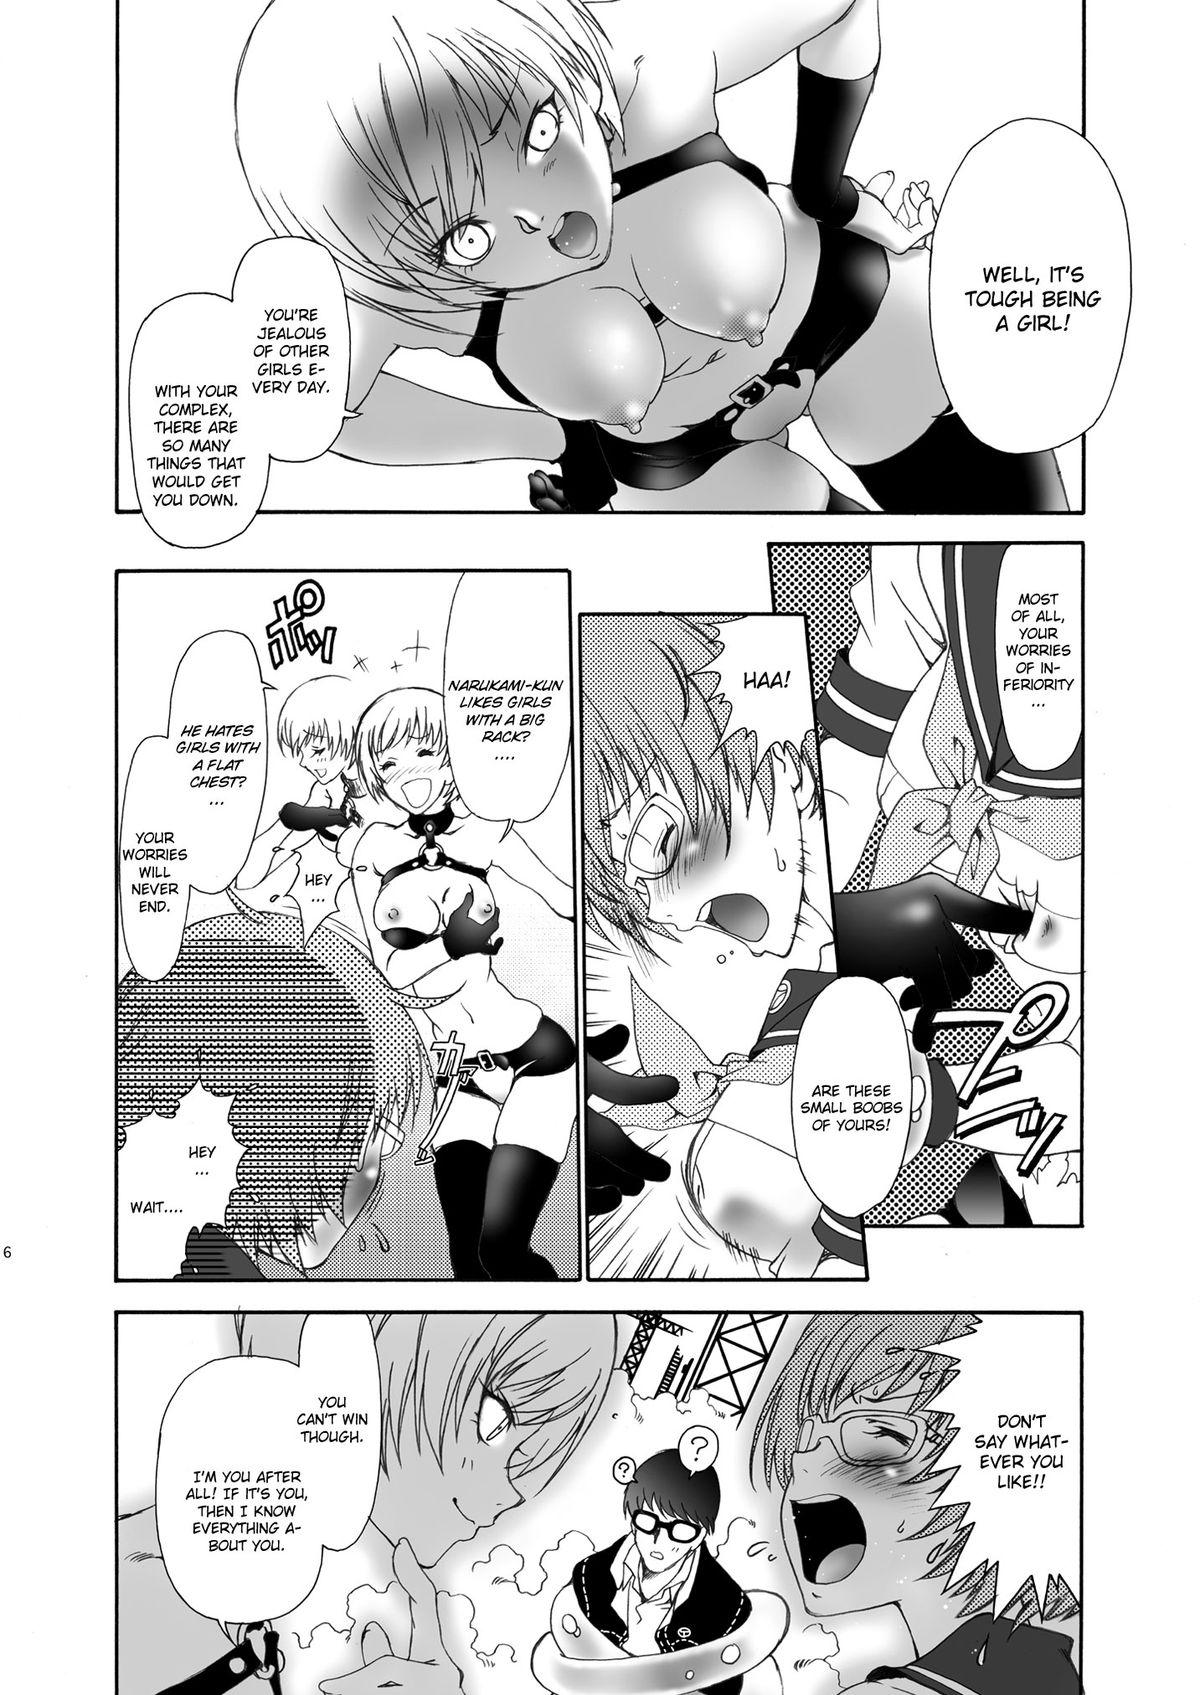 Dildos Ron't - Persona 4 Wank - Page 6